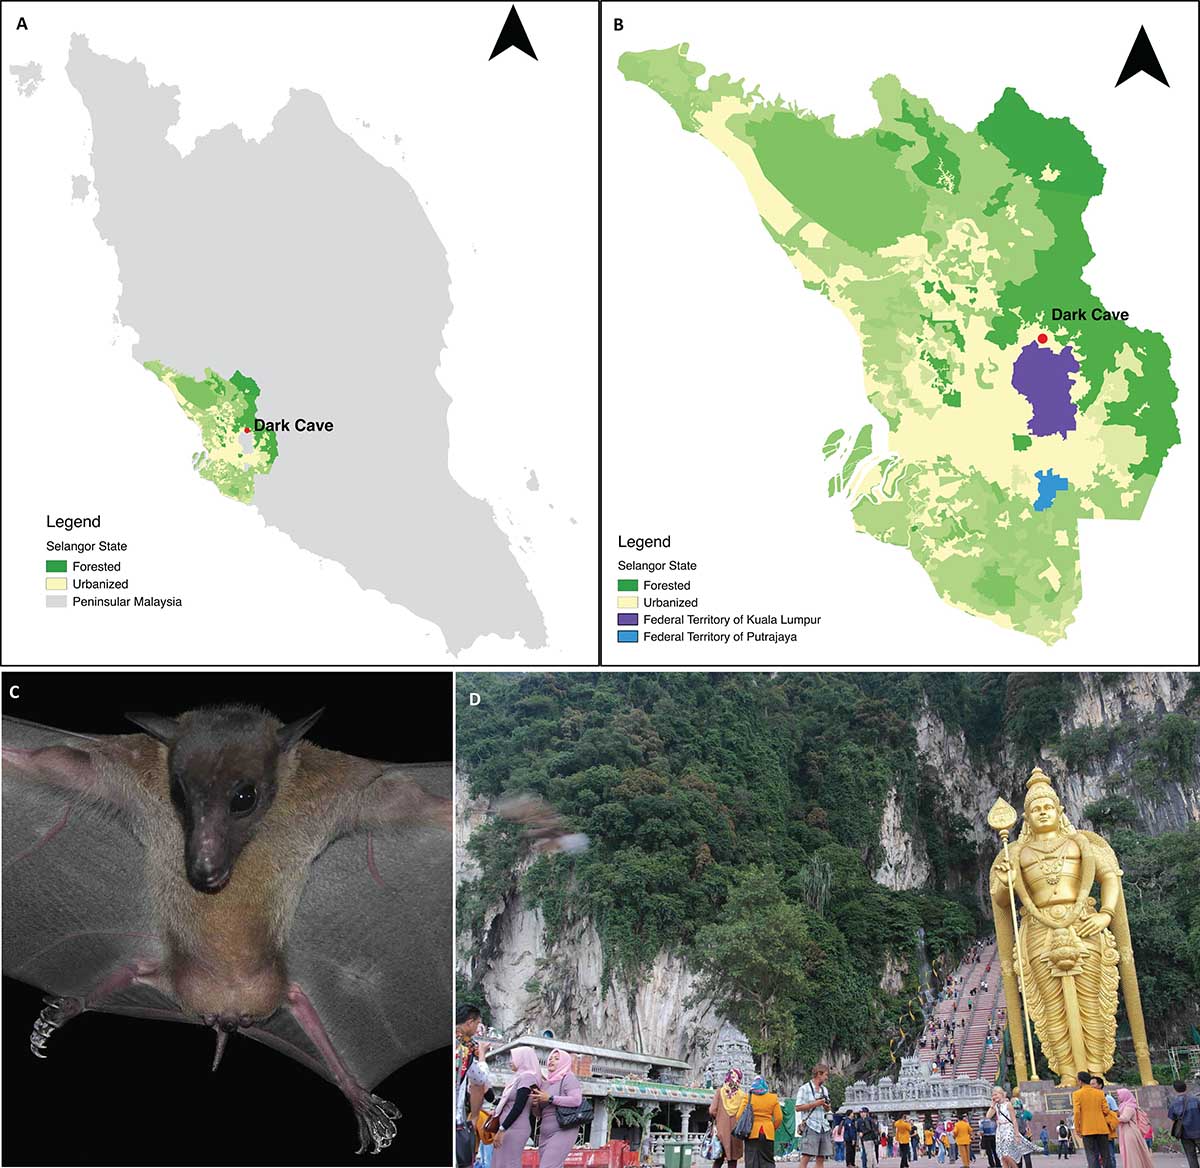 Pollination implications of bats roosting in an urban cave